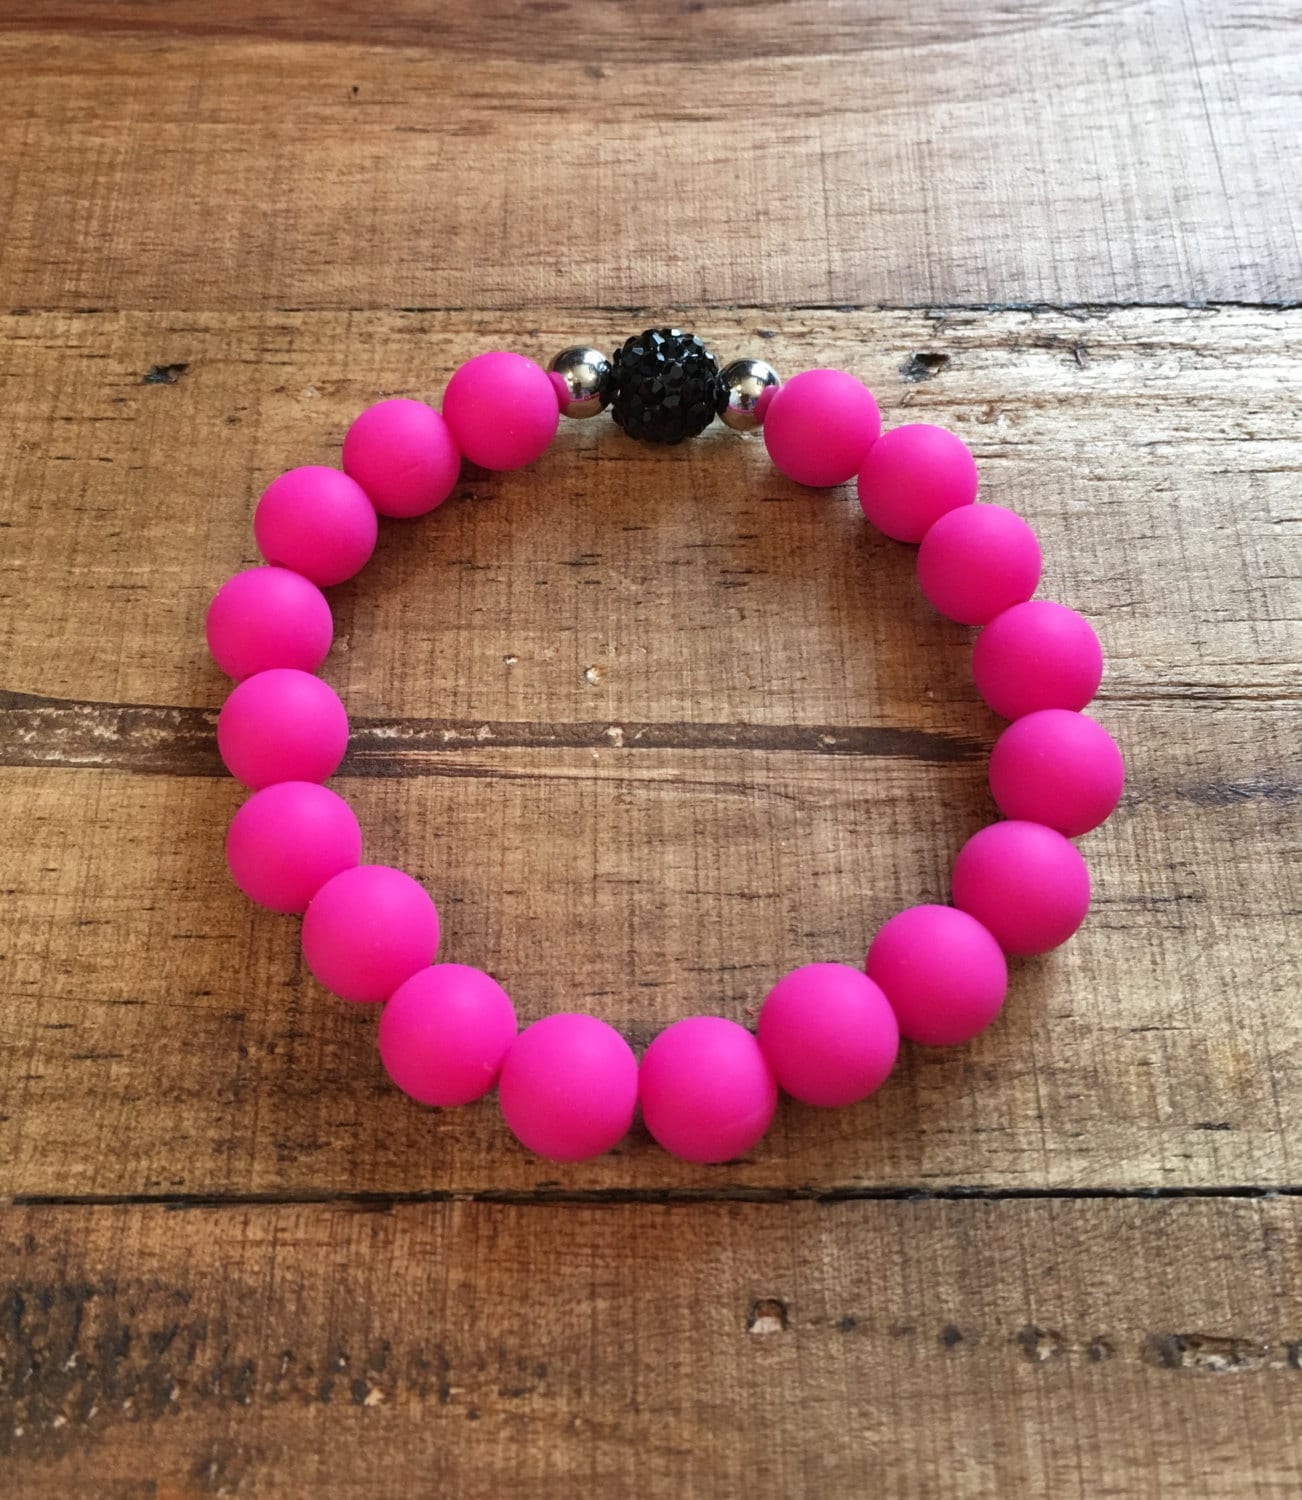 Amazon.com: NOVICA Handknotted Wood Beaded Bracelet Hot Pink Stone Thailand  Eco Friendly [7.5 in min L x 8.75 in max L x 0.8 in W] 'Opulent Pink':  Clothing, Shoes & Jewelry